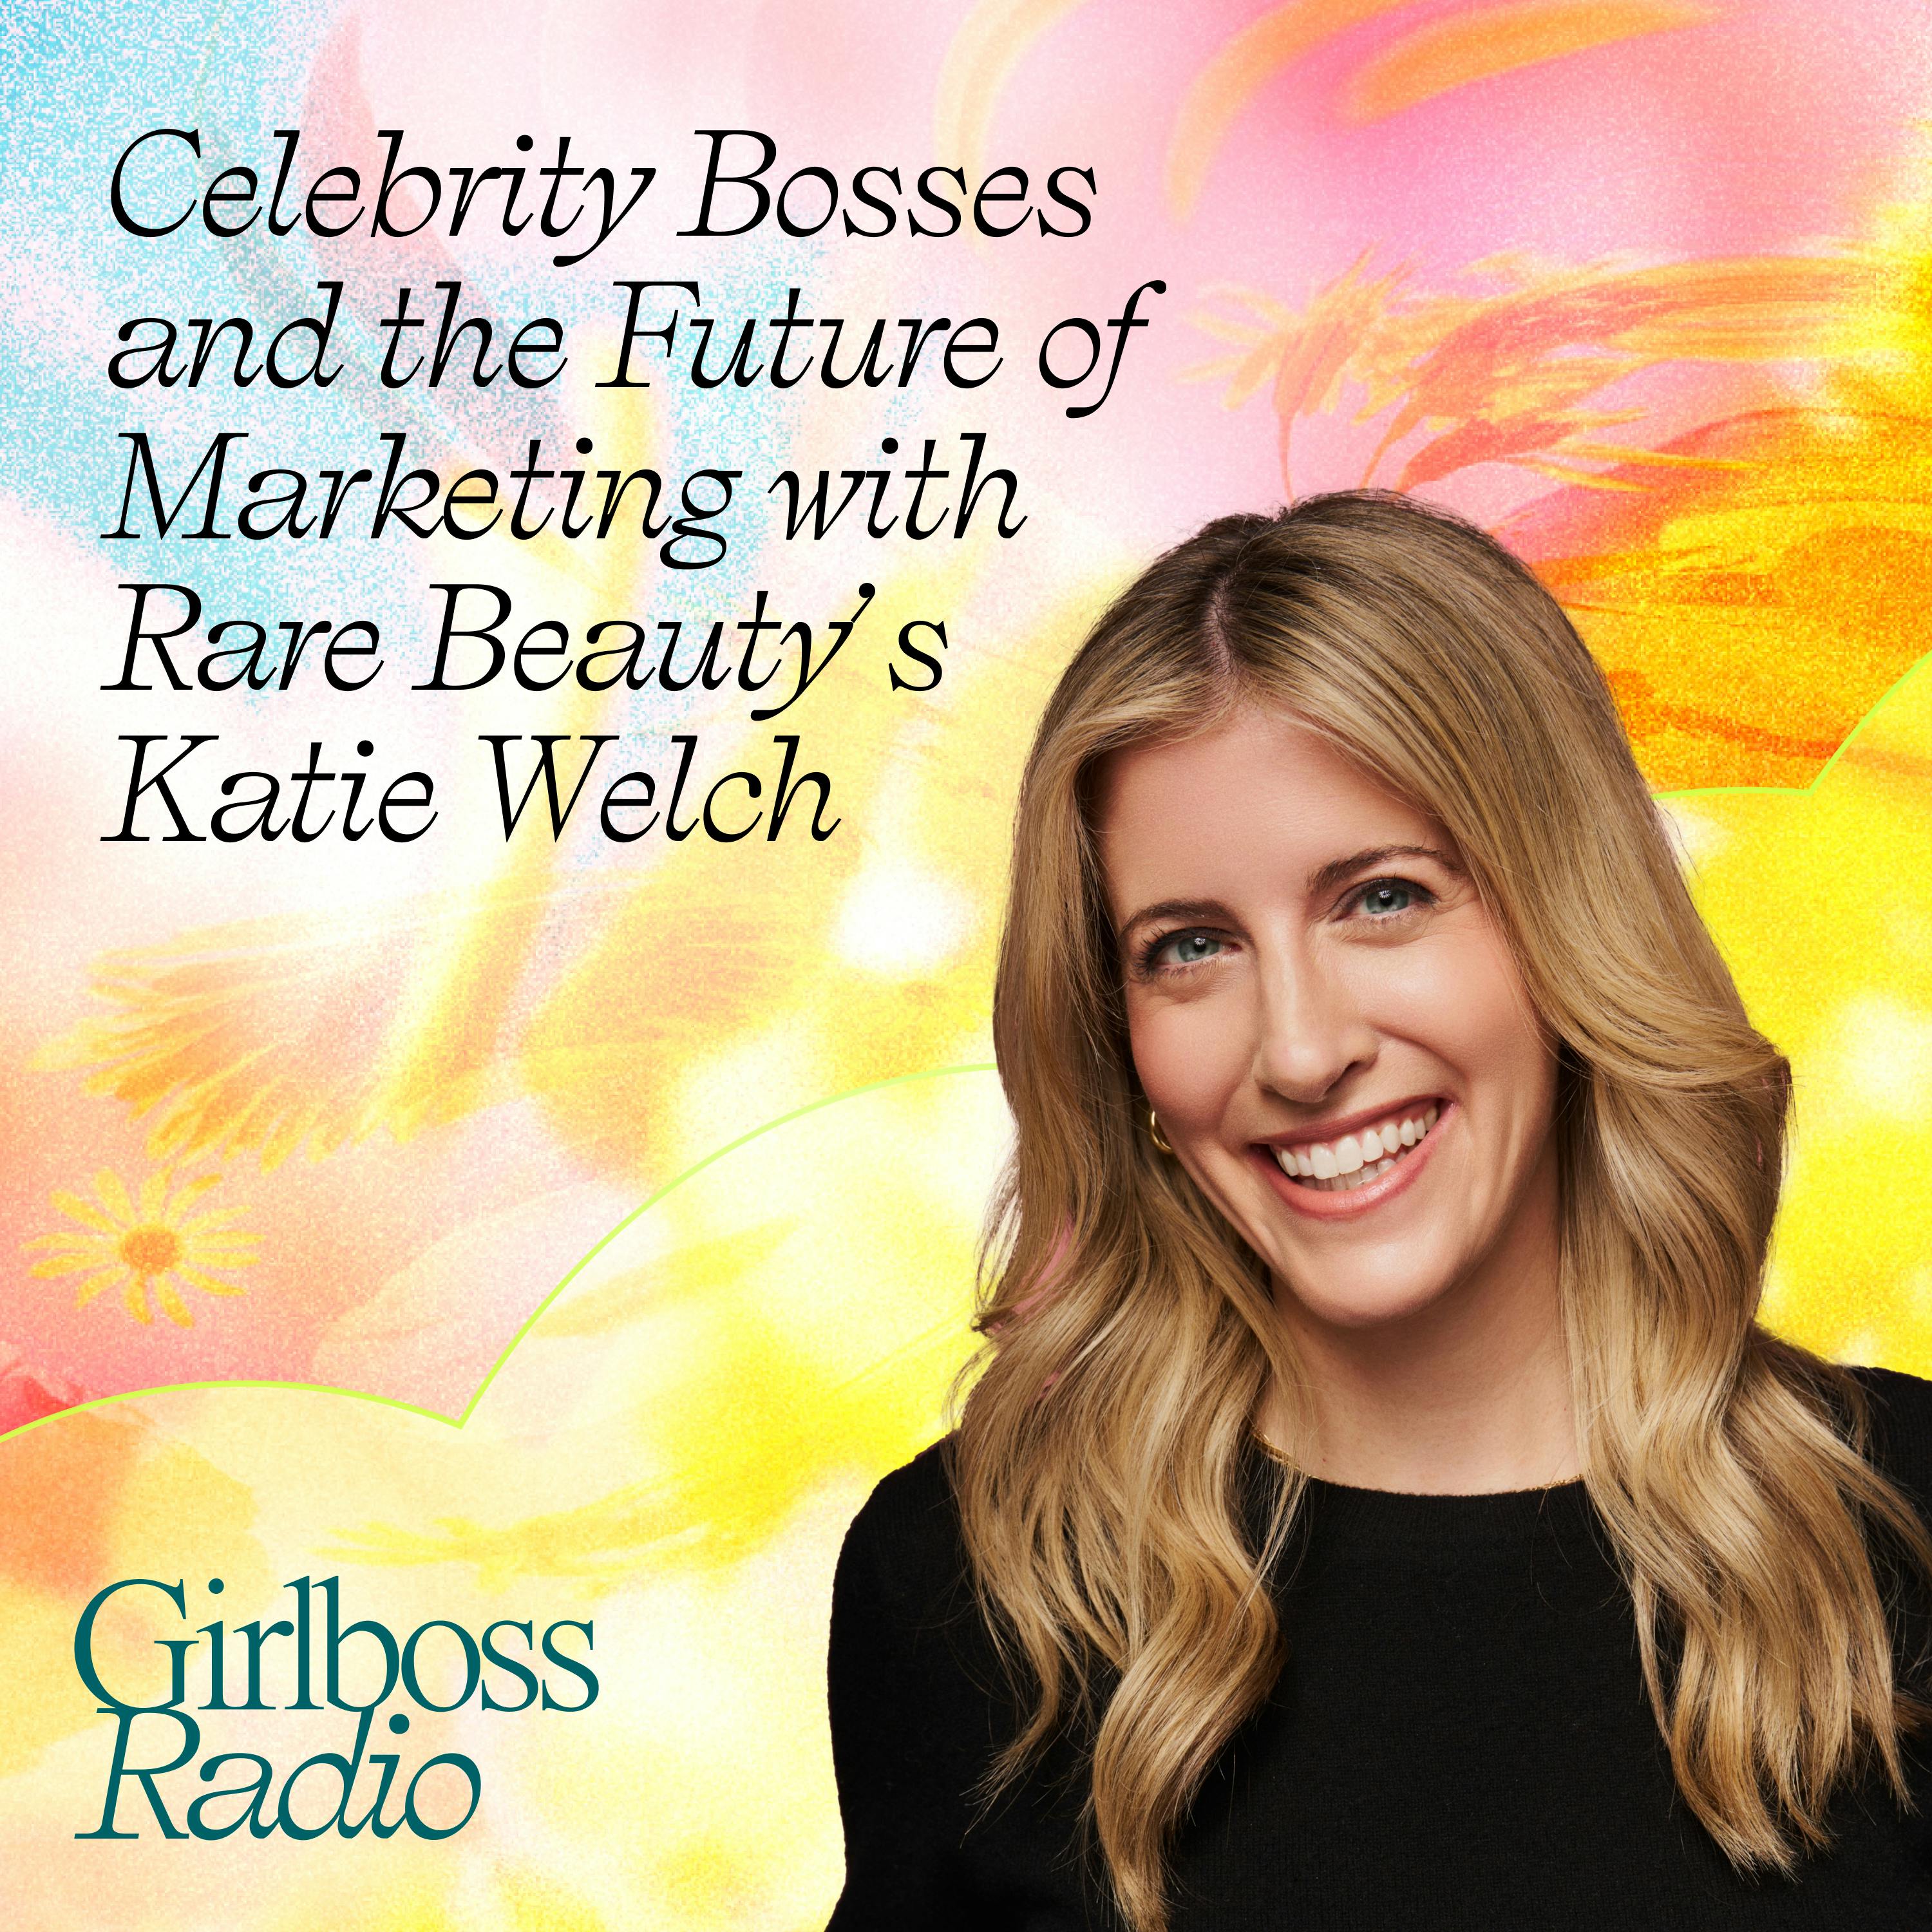 Celebrity Bosses and the Future of Marketing with Rare Beauty’s CMO Katie Welch